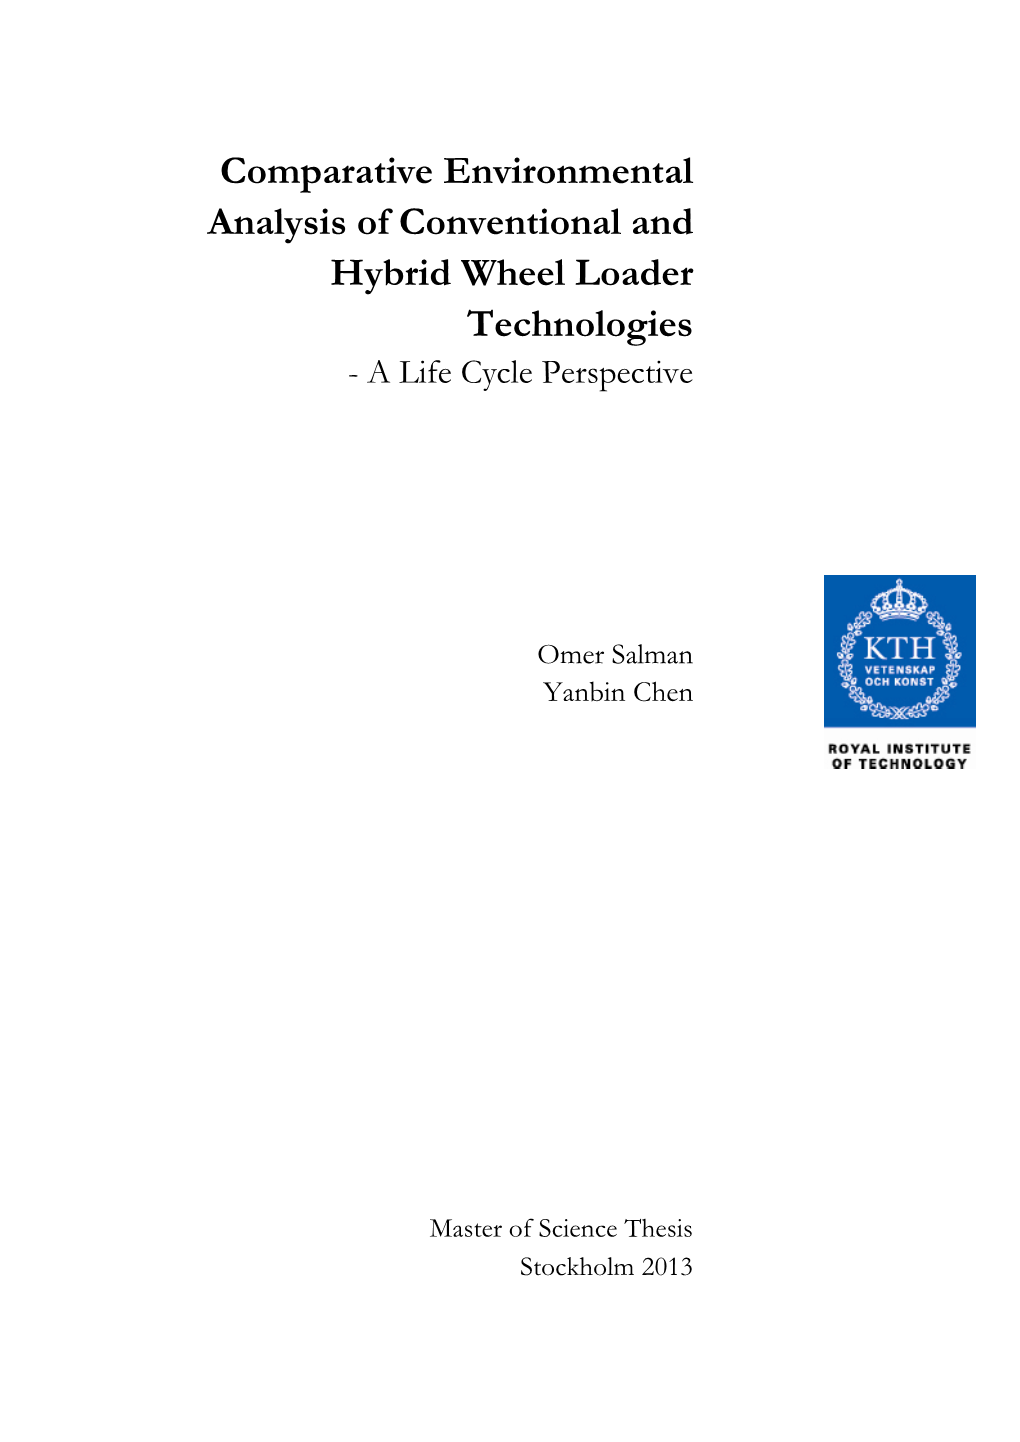 Comparative Environmental Analysis of Conventional and Hybrid Wheel Loader Technologies - a Life Cycle Perspective